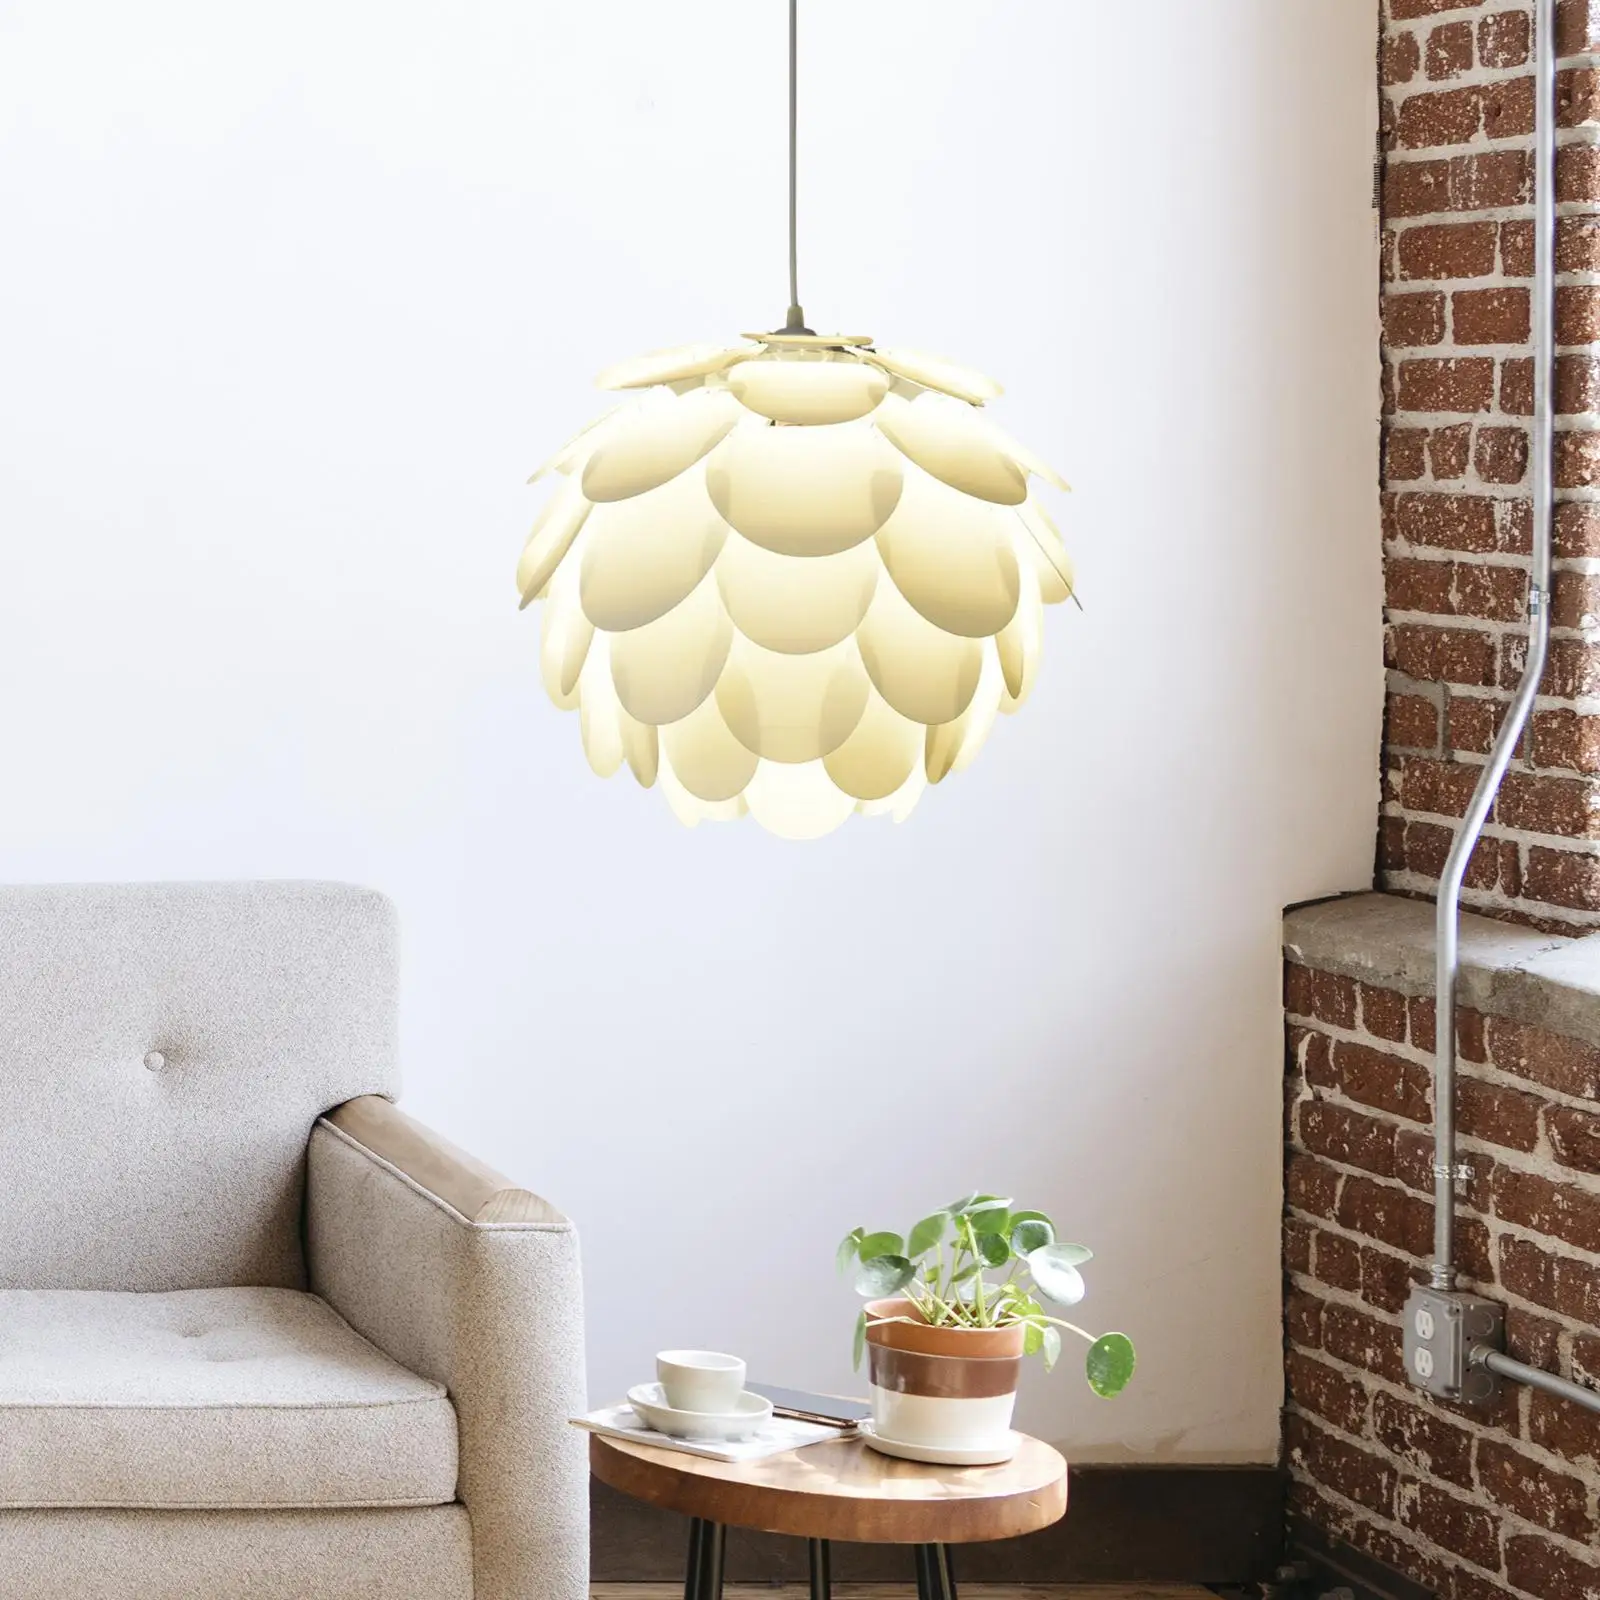 Decorative Lampshade Hanging Light Cover Minimalist Chandelier Shade Crafts for Restaurant Library Bedroom Coffee Decor